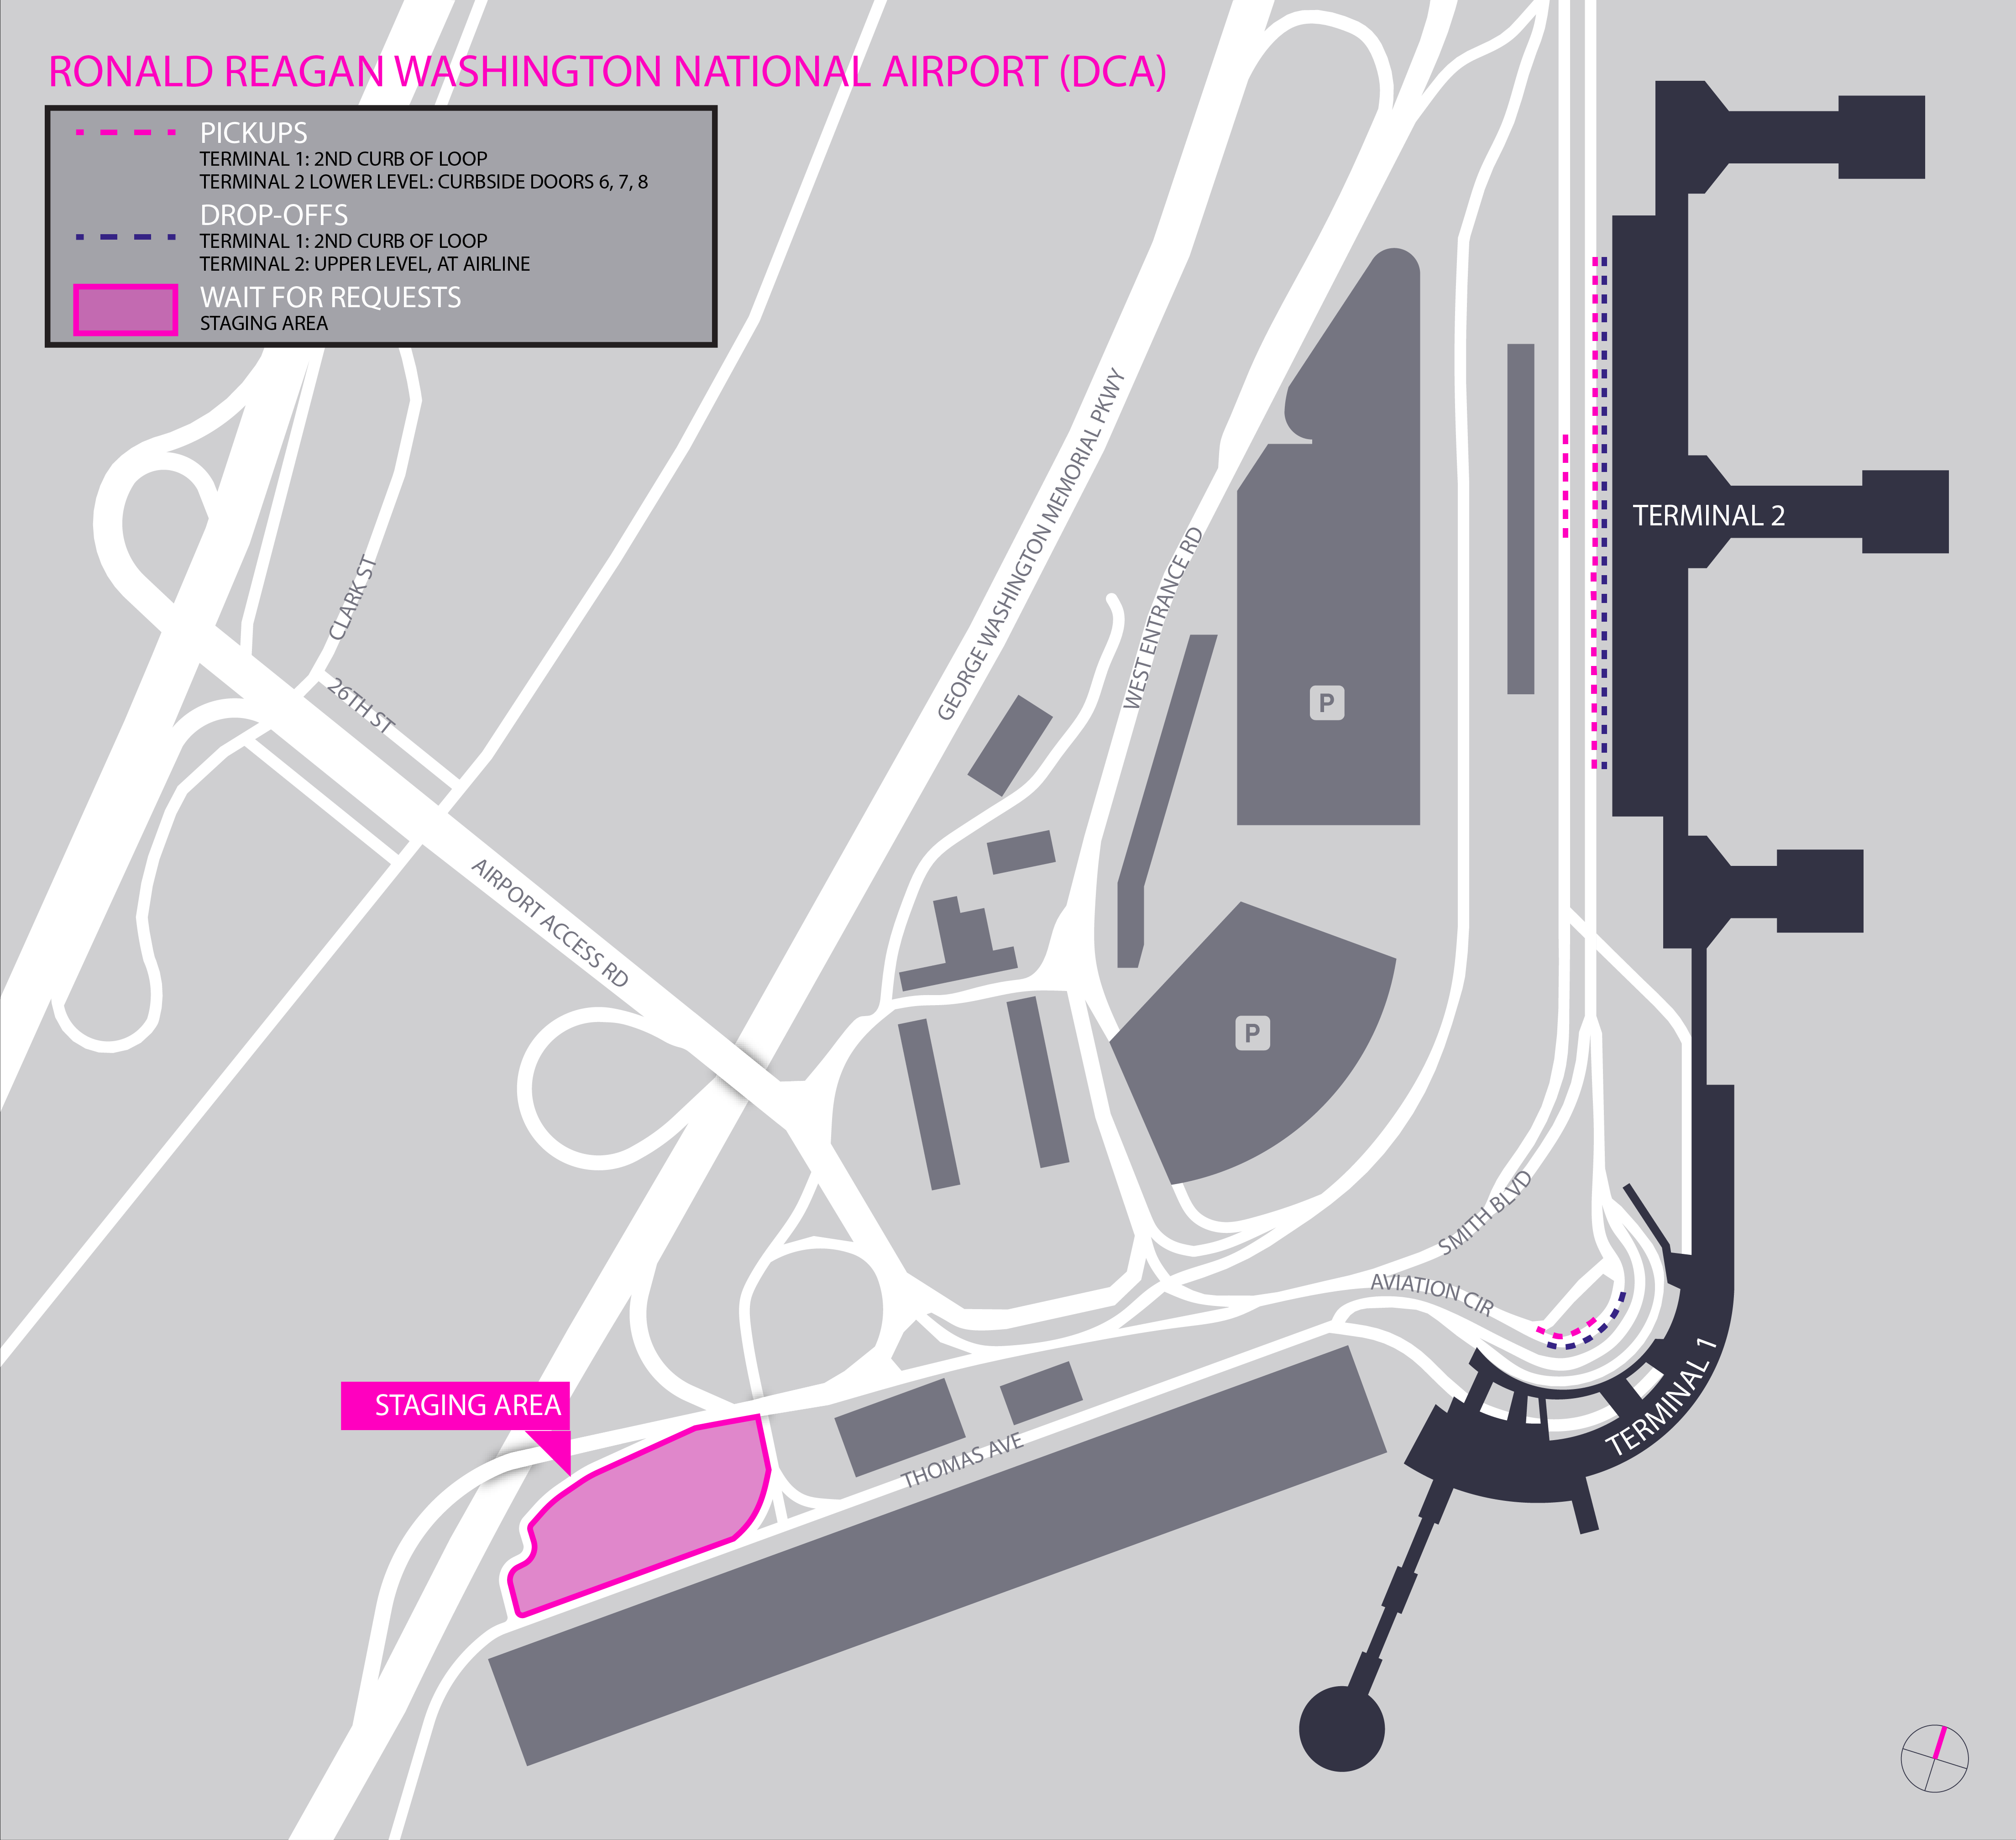 This image is a map of the Ronald Reagan airport. It includes staging lot, pickup, and drop-off areas.